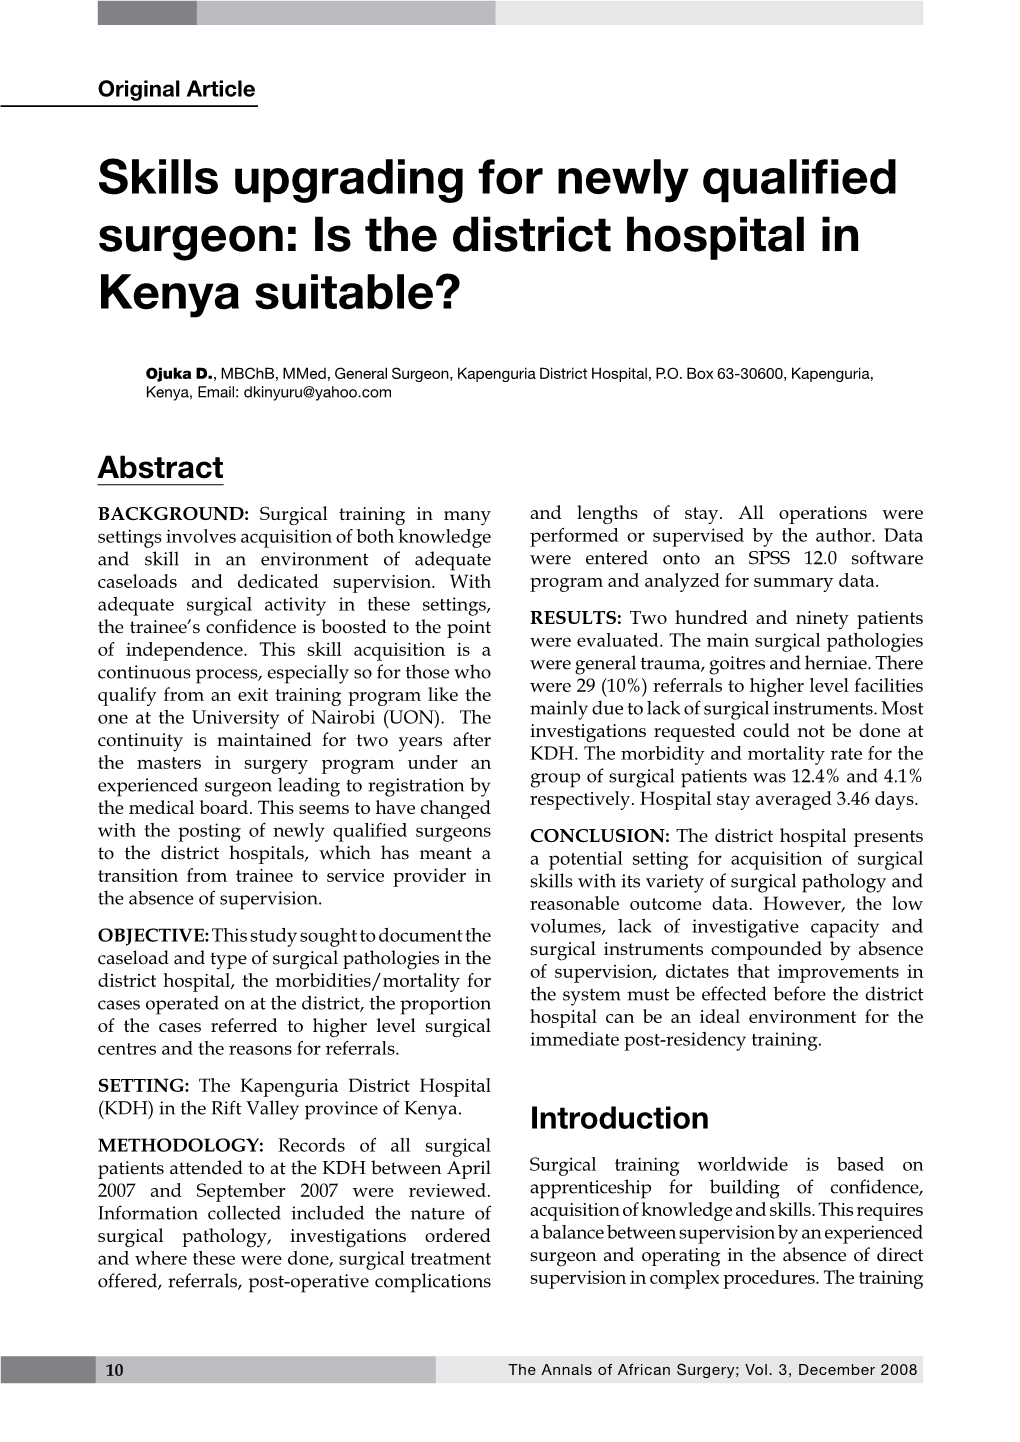 Skills Upgrading for Newly Qualified Surgeon: Is the District Hospital in Kenya Suitable?